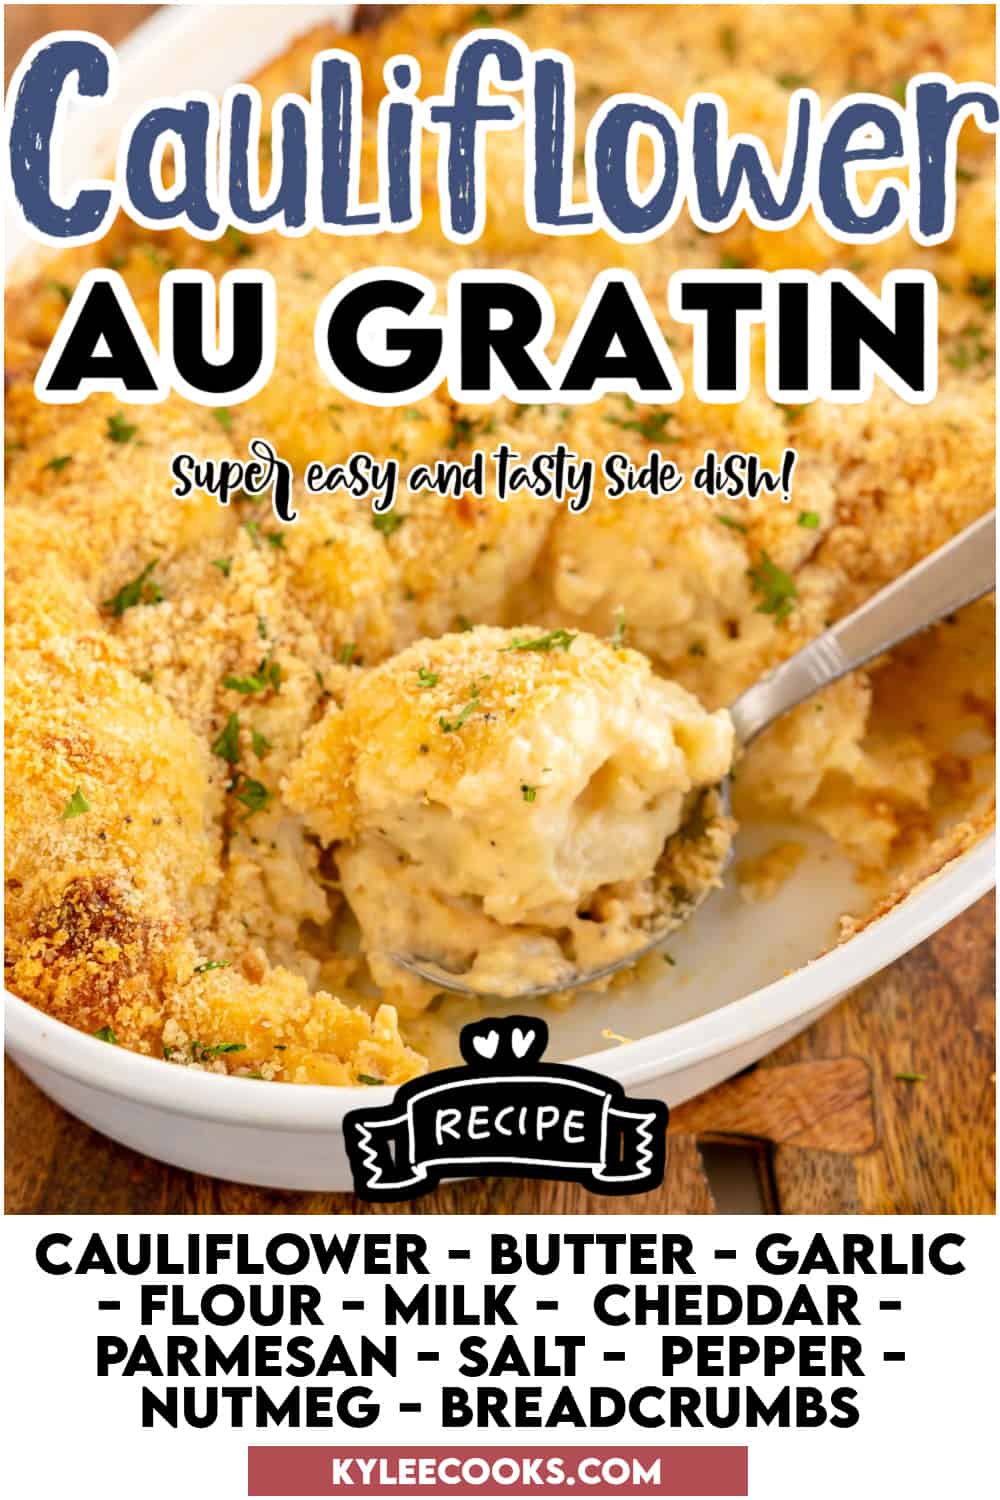 Cheesy cauliflower au gratin in a white dish with a spoon, with recipe name and ingredients overlaid in text.